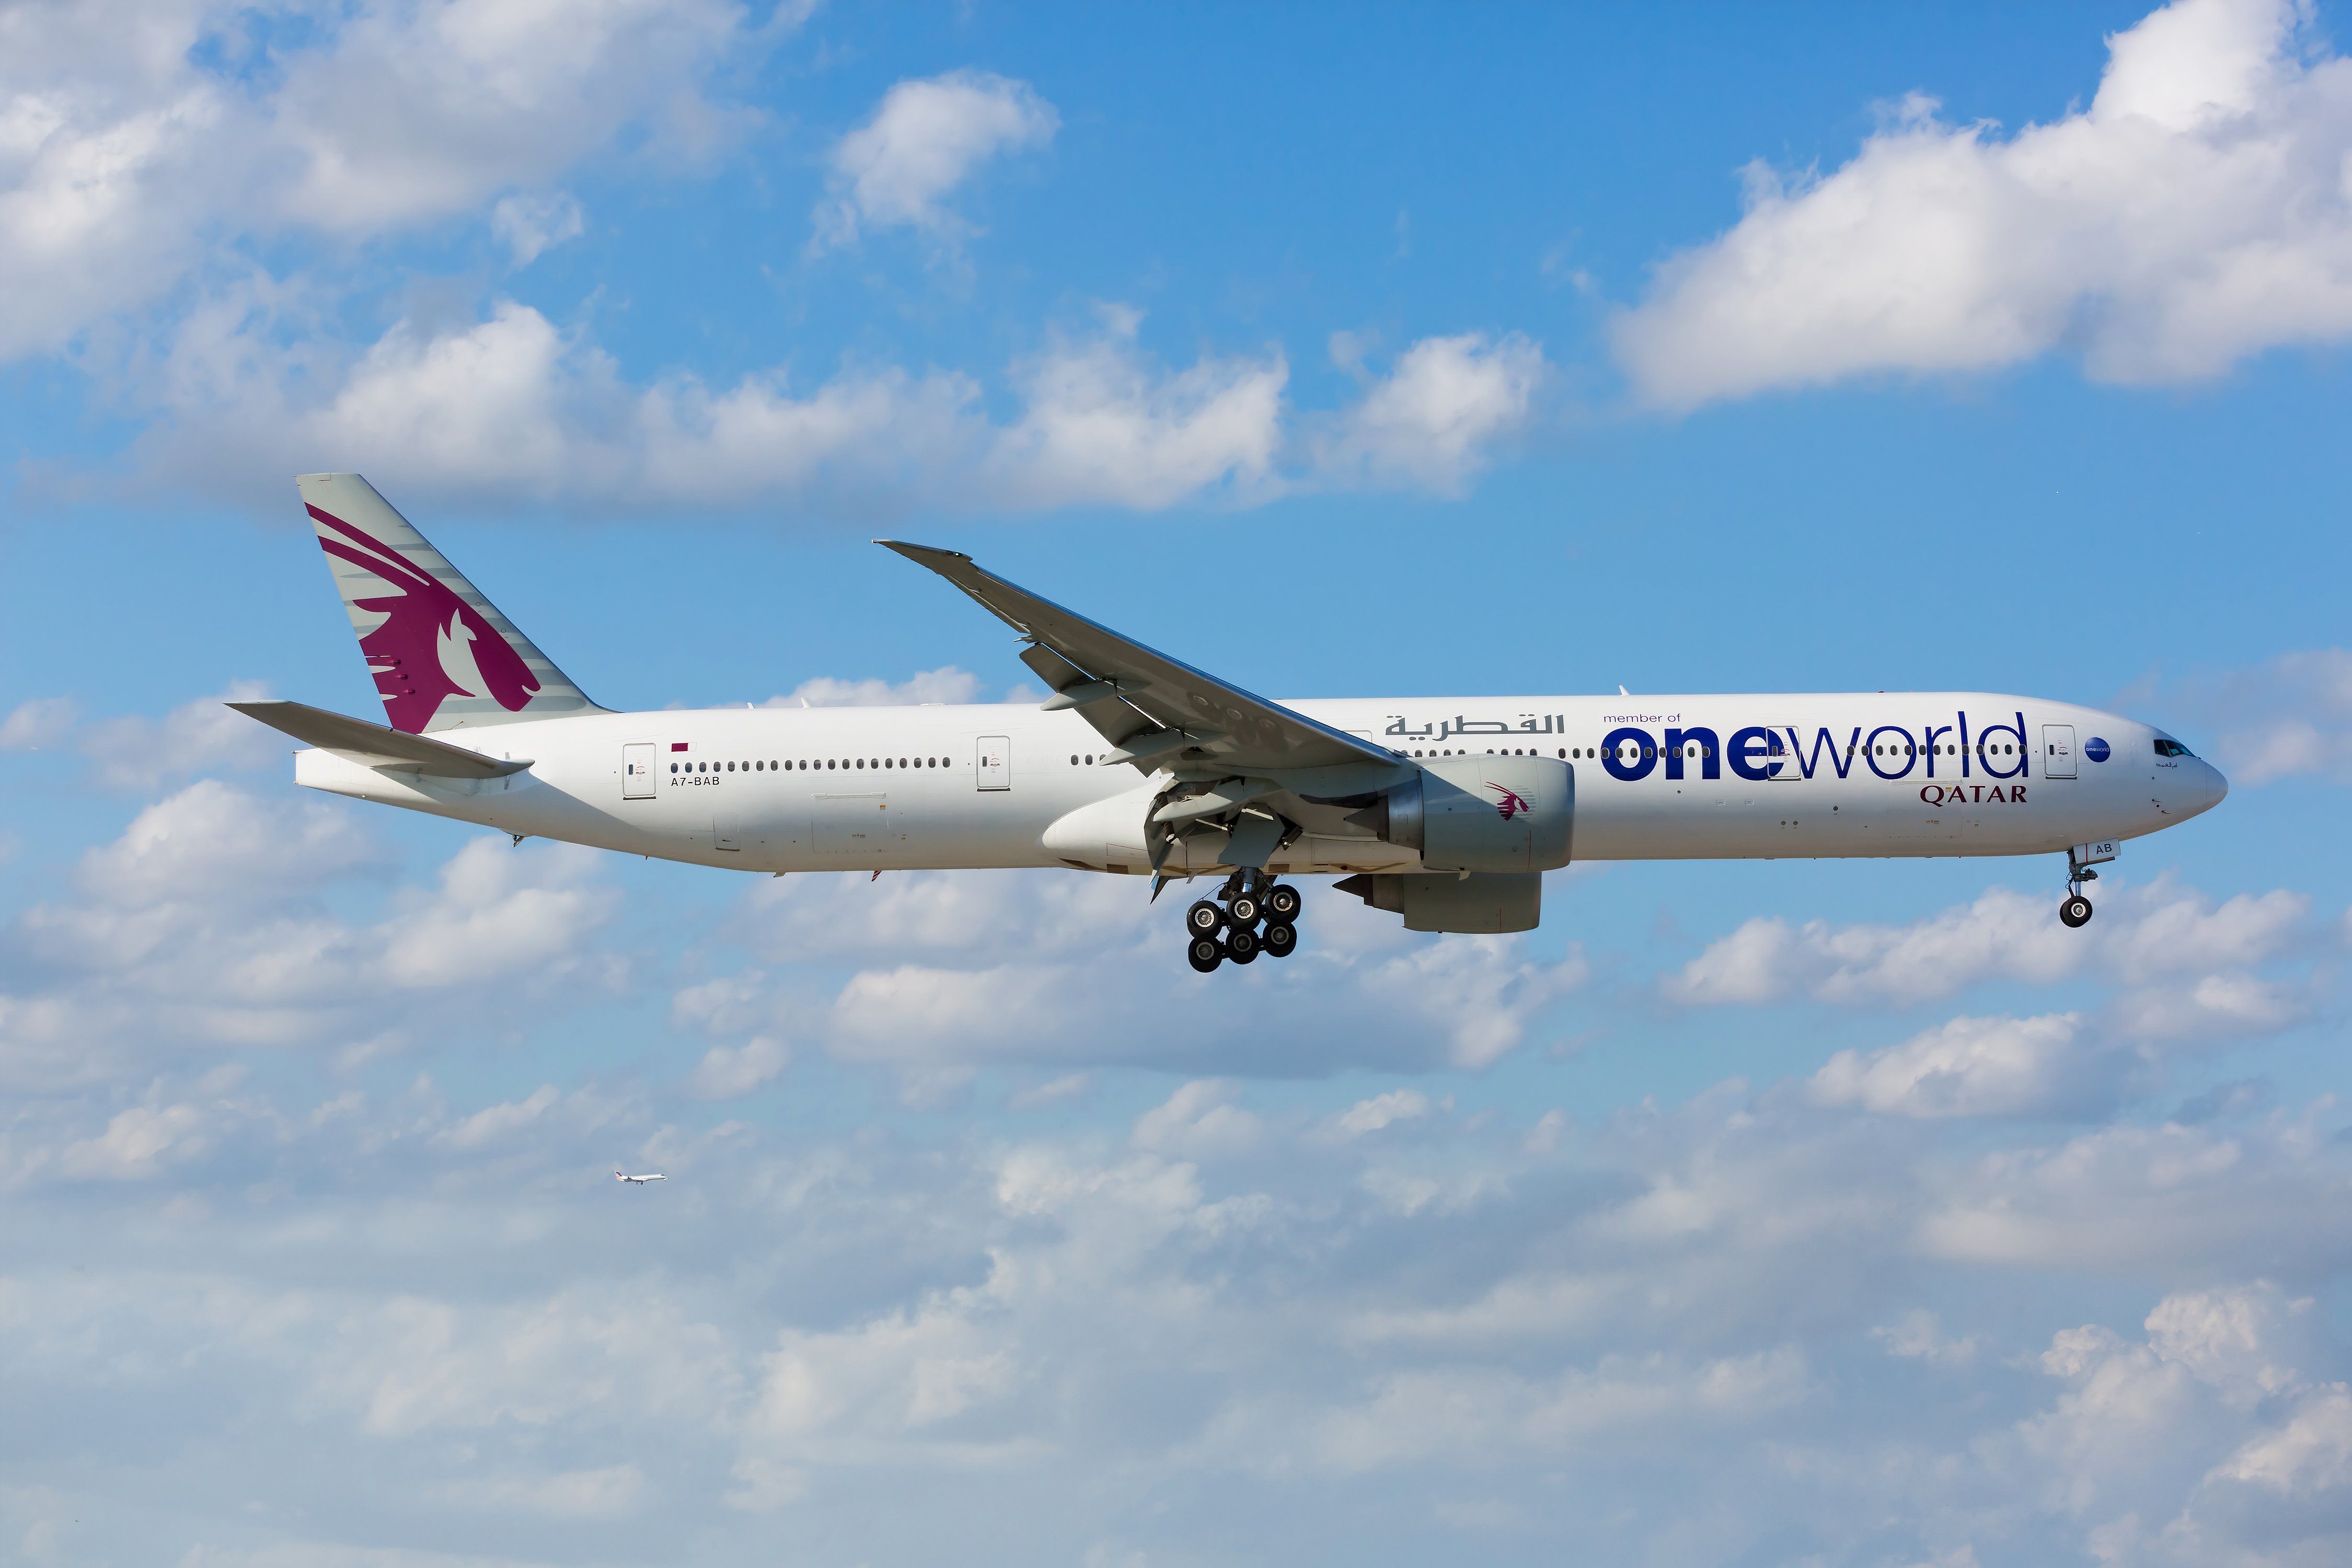 A Boeing 777-300ER aircraft of Qatar Airways displaying the One World livery landing at the Miami International Airport.